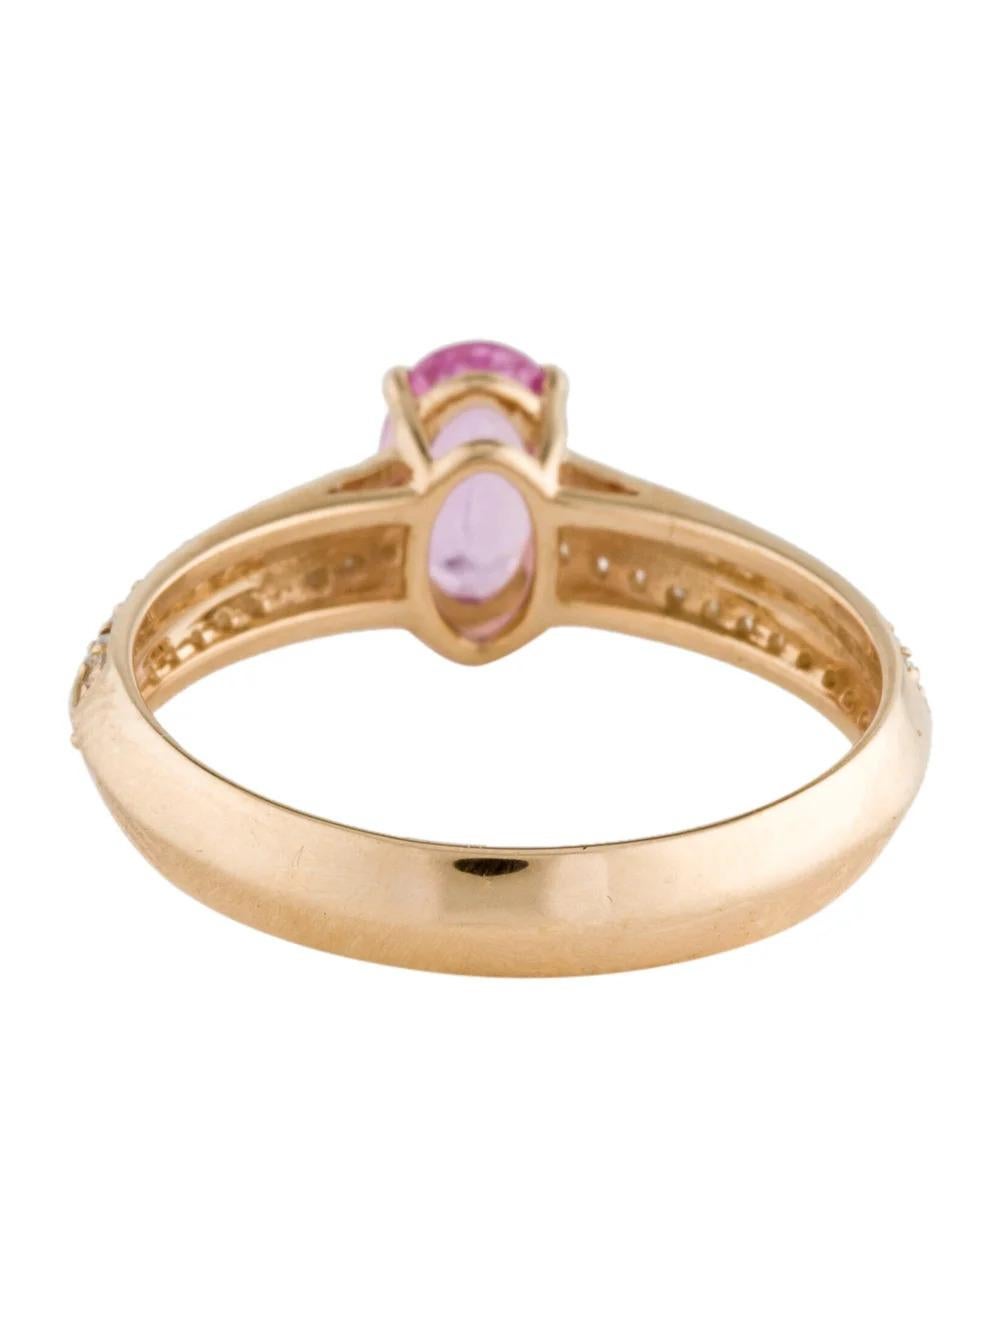 14K Pink Sapphire & Diamond Cocktail Ring, Size 6.75 - Stunning Elegance In New Condition For Sale In Holtsville, NY